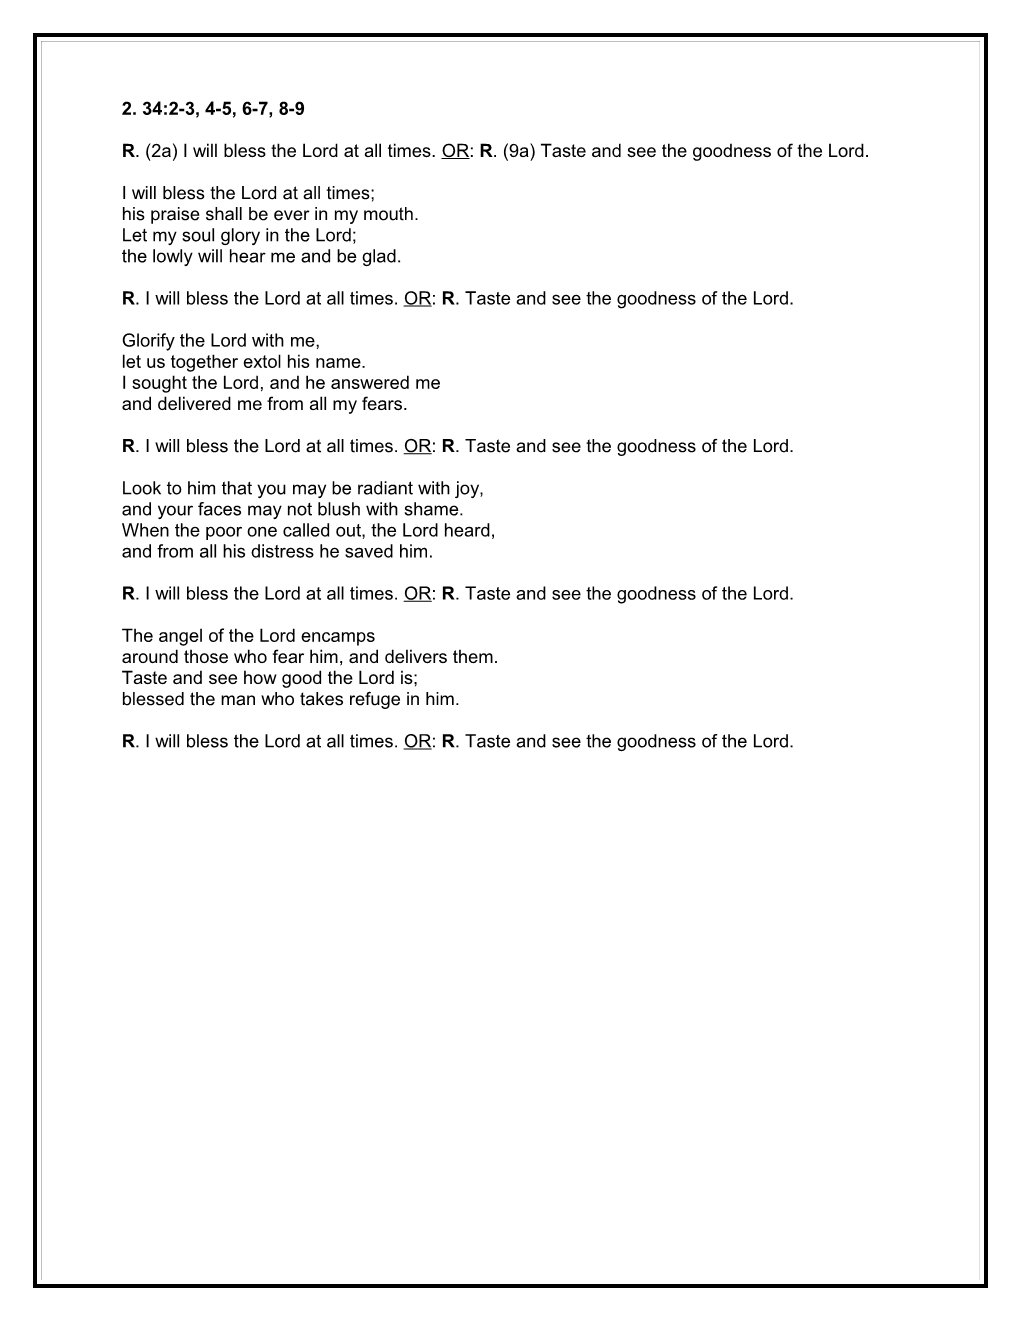 Options for Responsorial Psalm